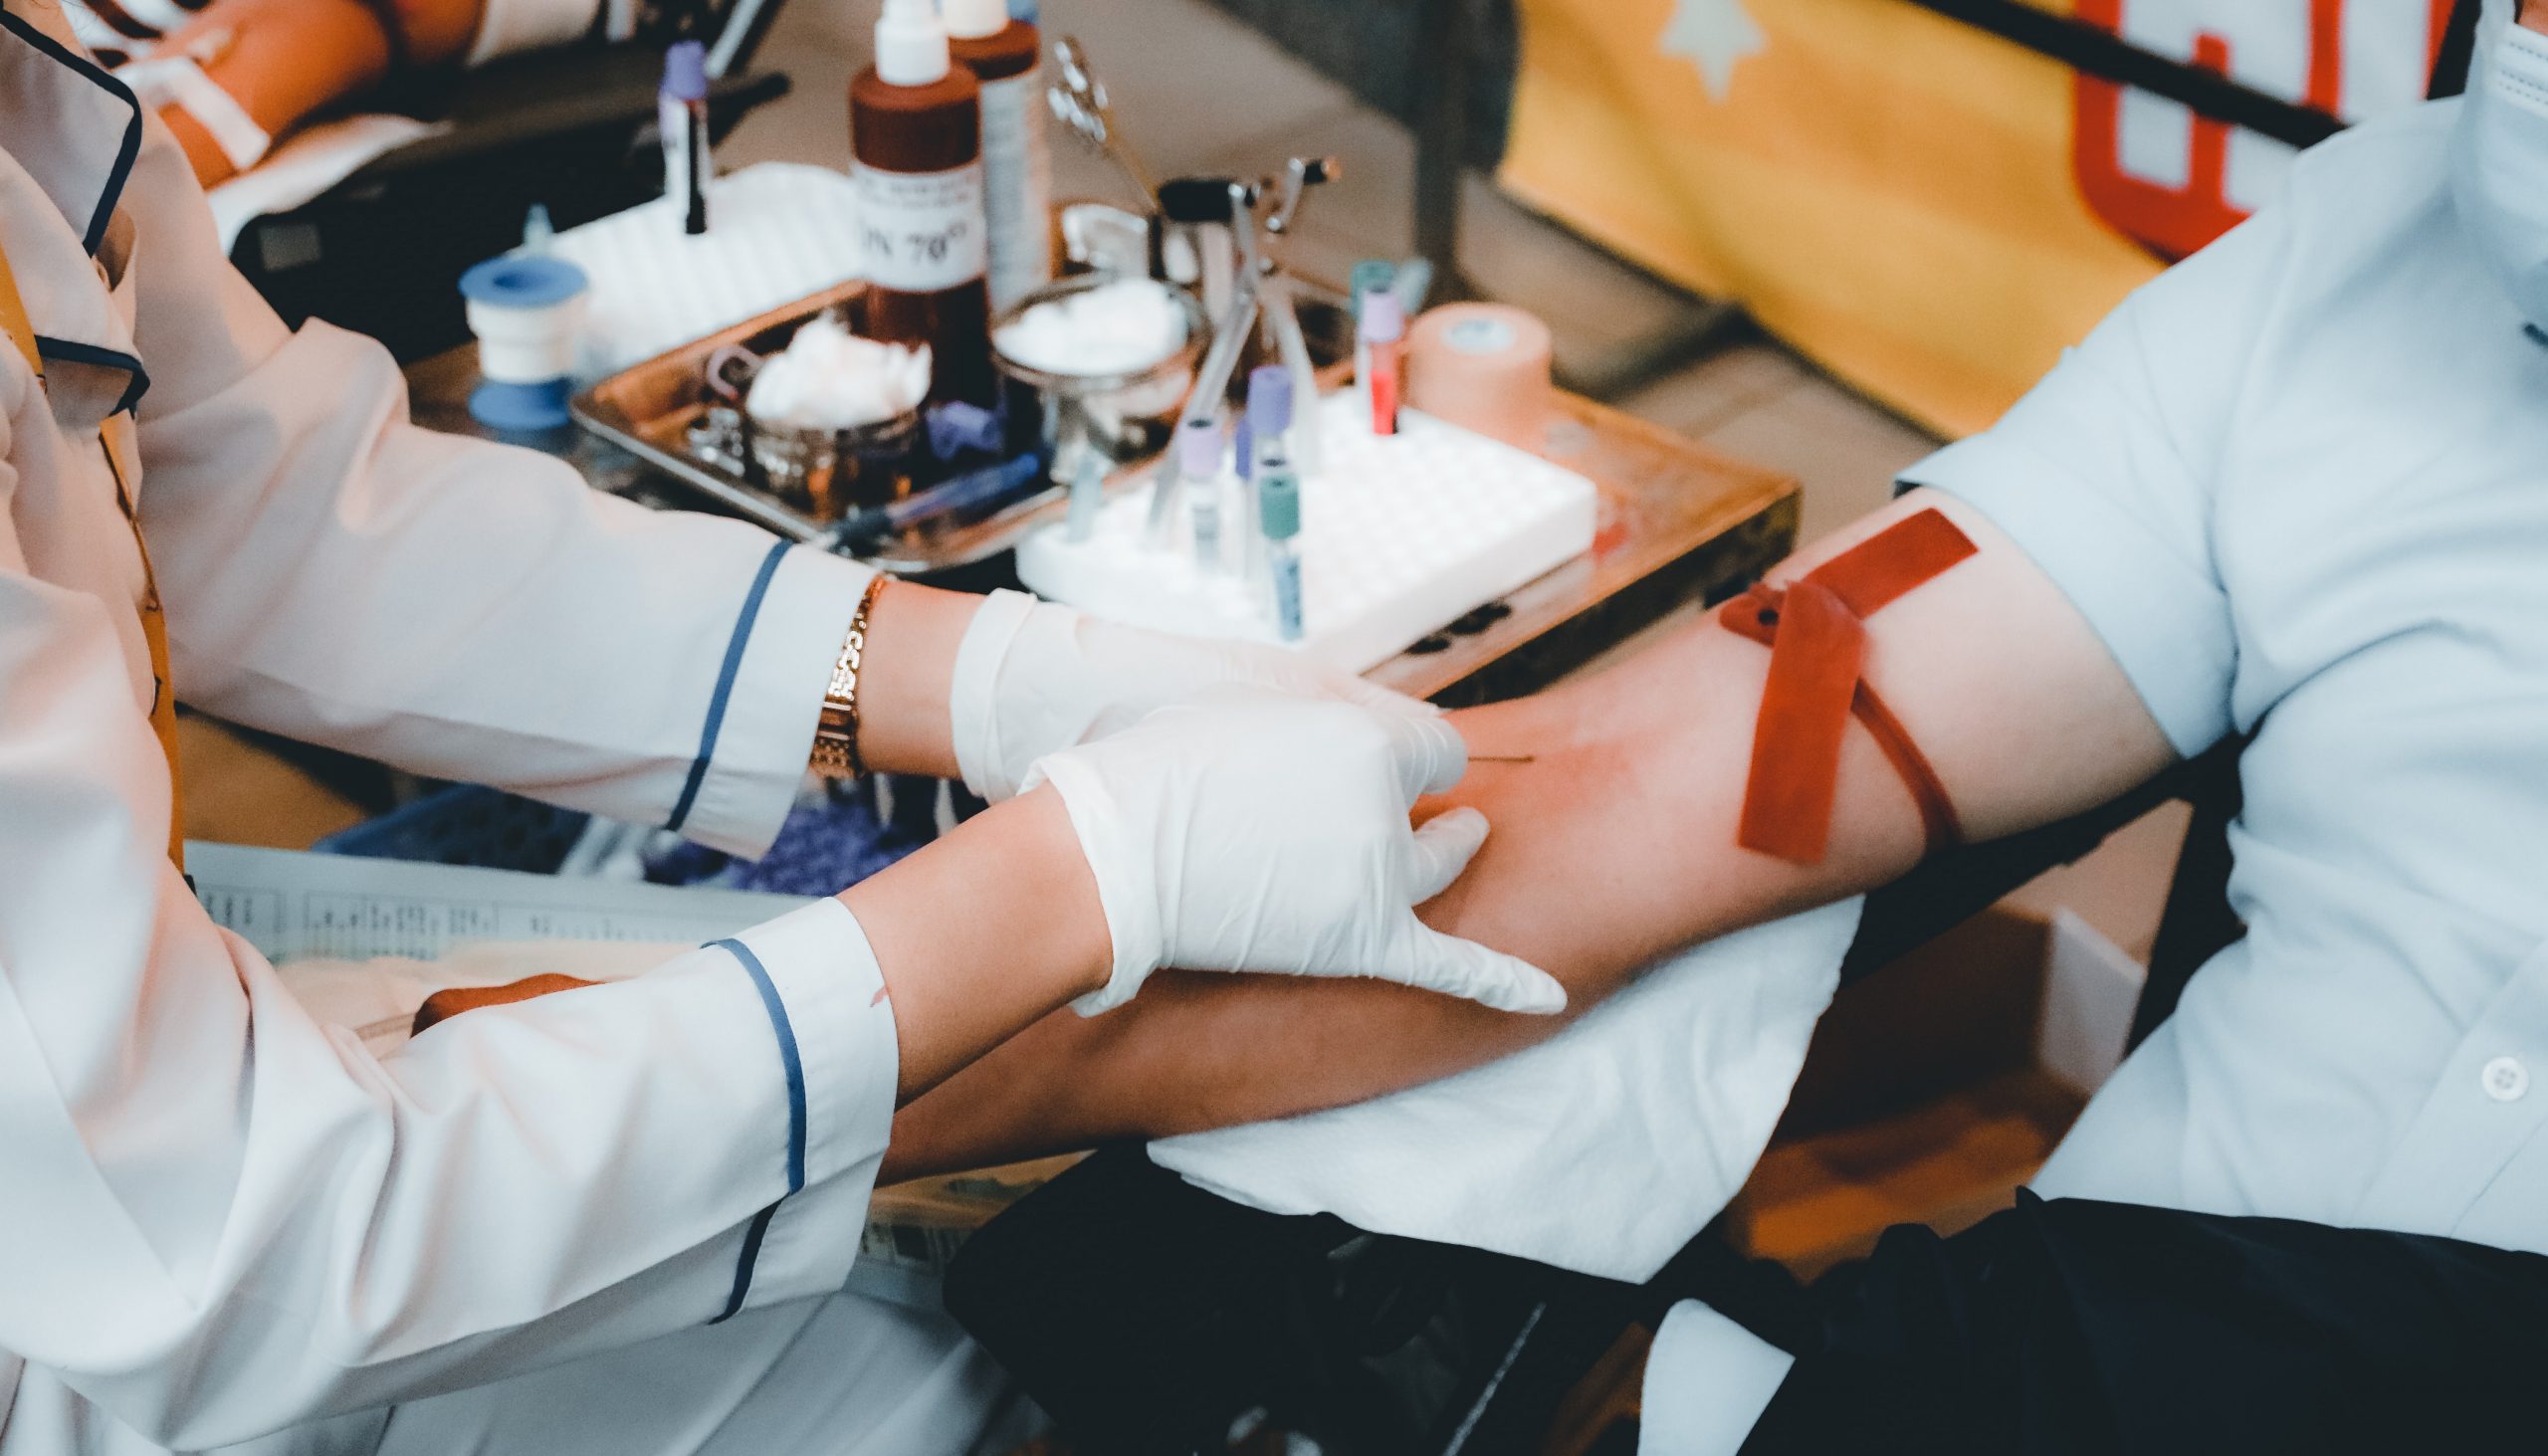 How to Become a Dialysis Technician